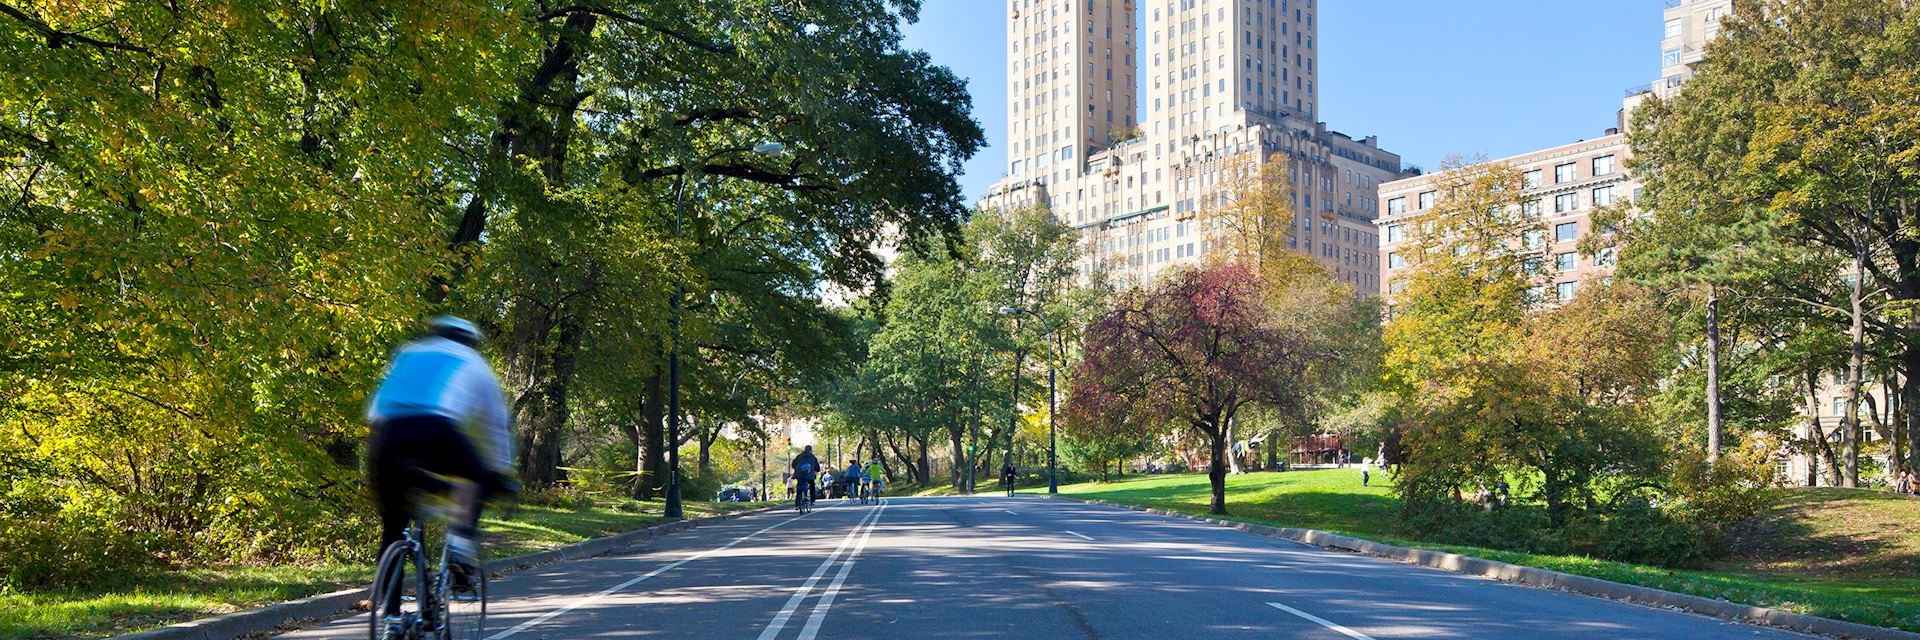 Cycling in Central Park, New York